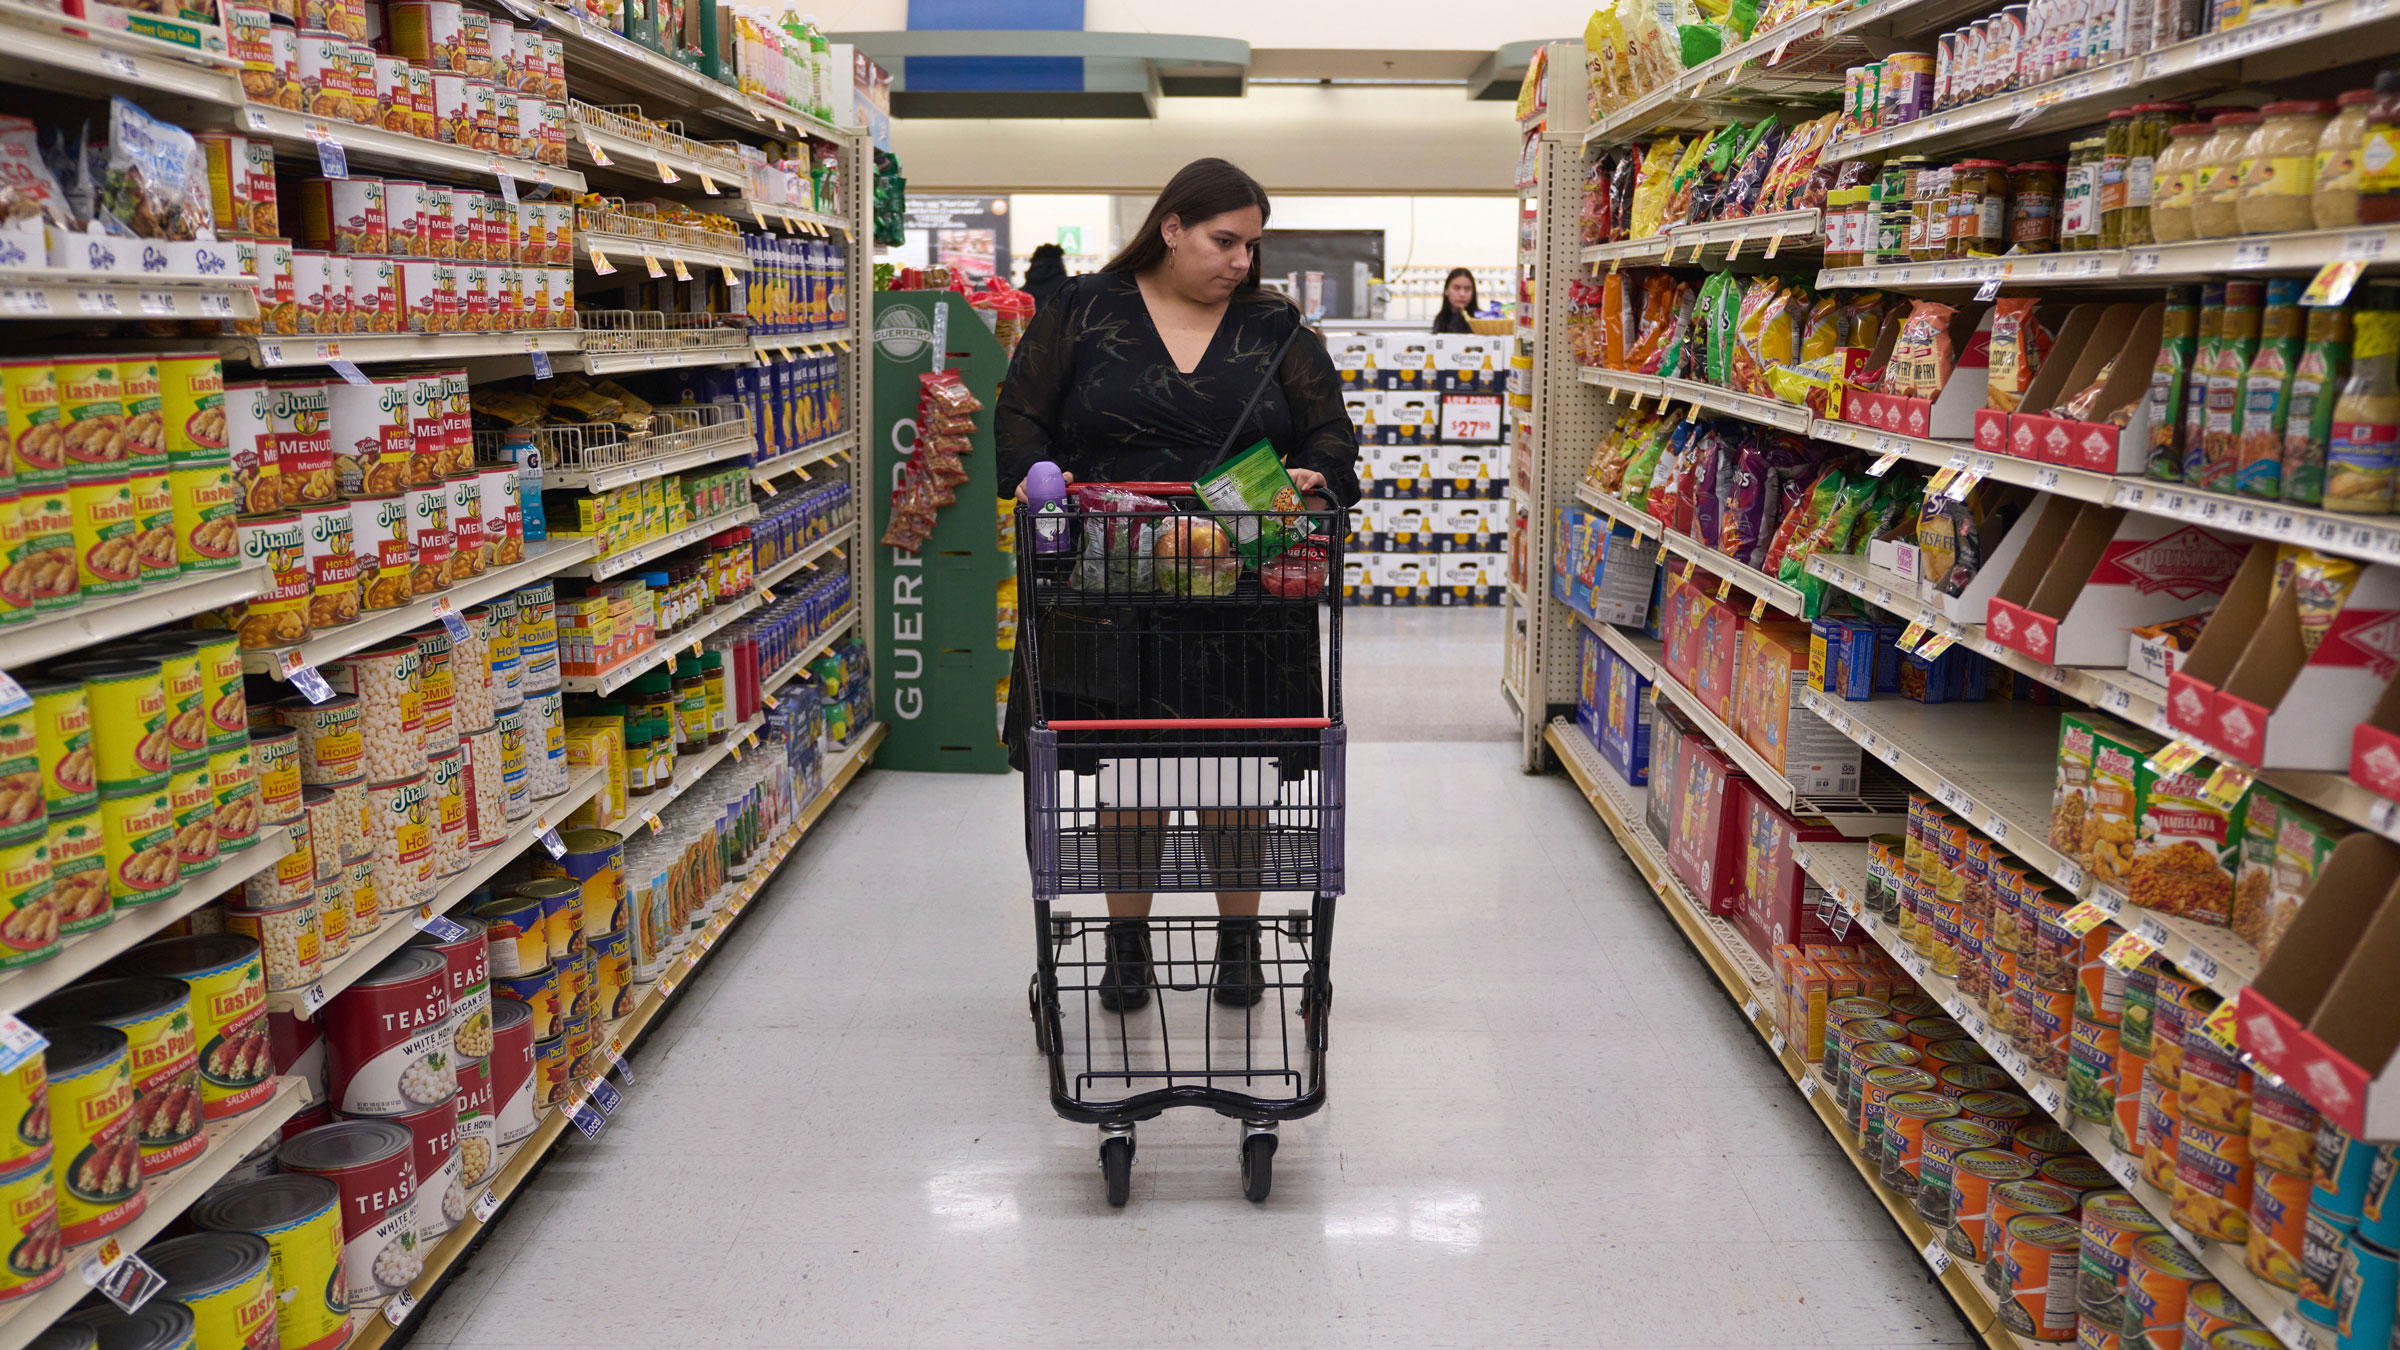 Jaqueline Benitez, who depends on California's SNAP benefits to help pay for food, shops for groceries at a supermarket in Bellflower, California, in February.